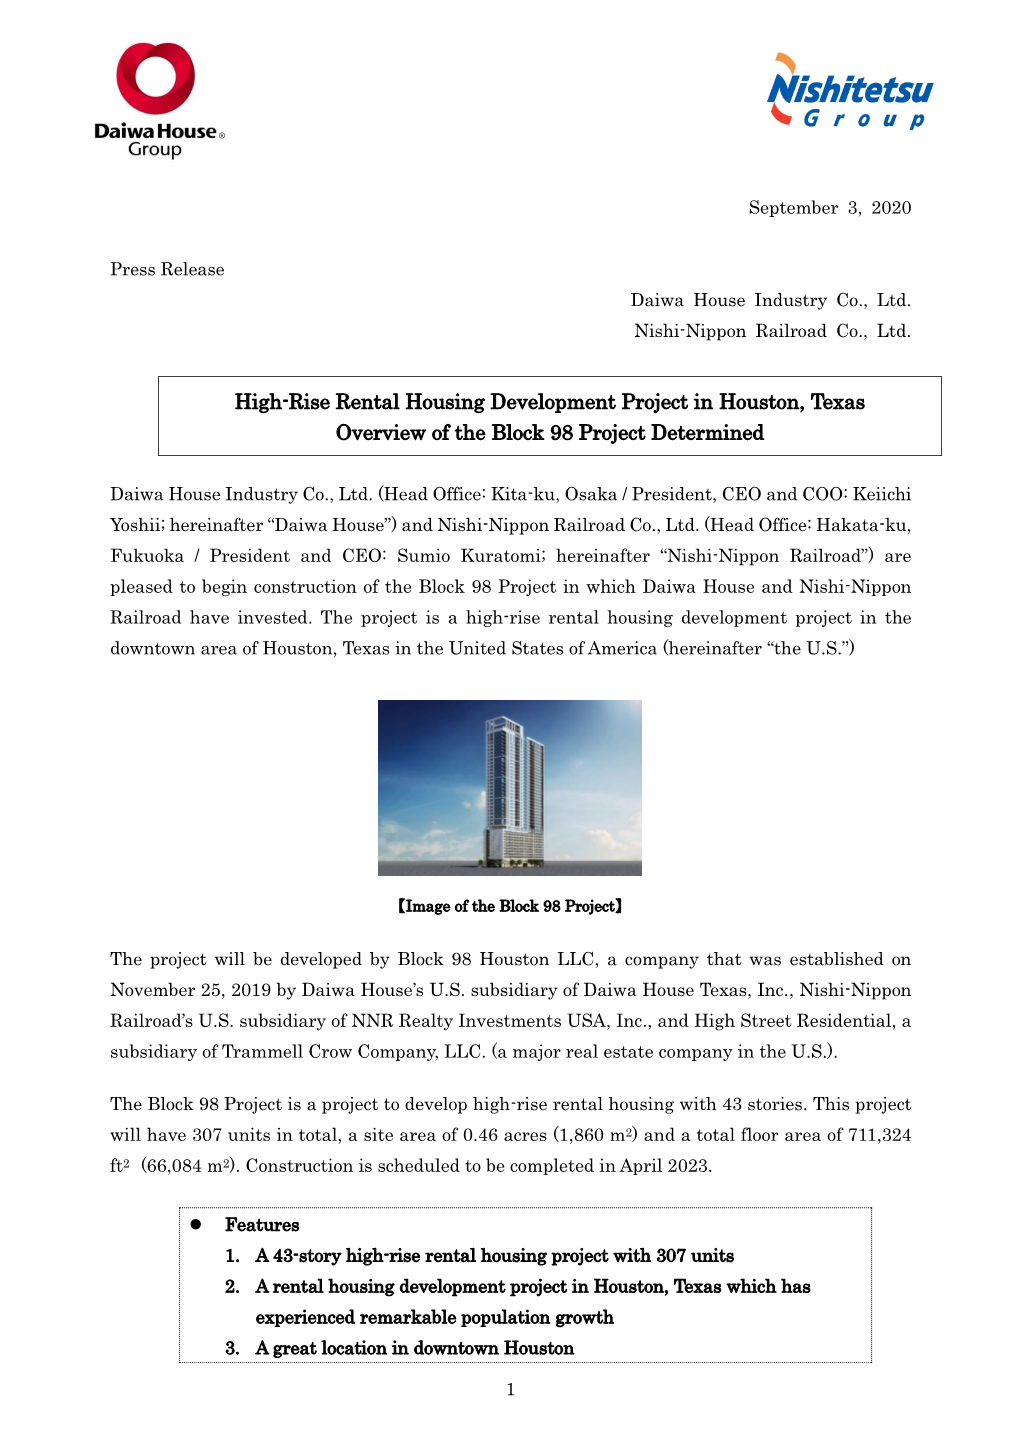 High-Rise Rental Housing Development Project in Houston, Texas Overview of the Block 98 Project Determined